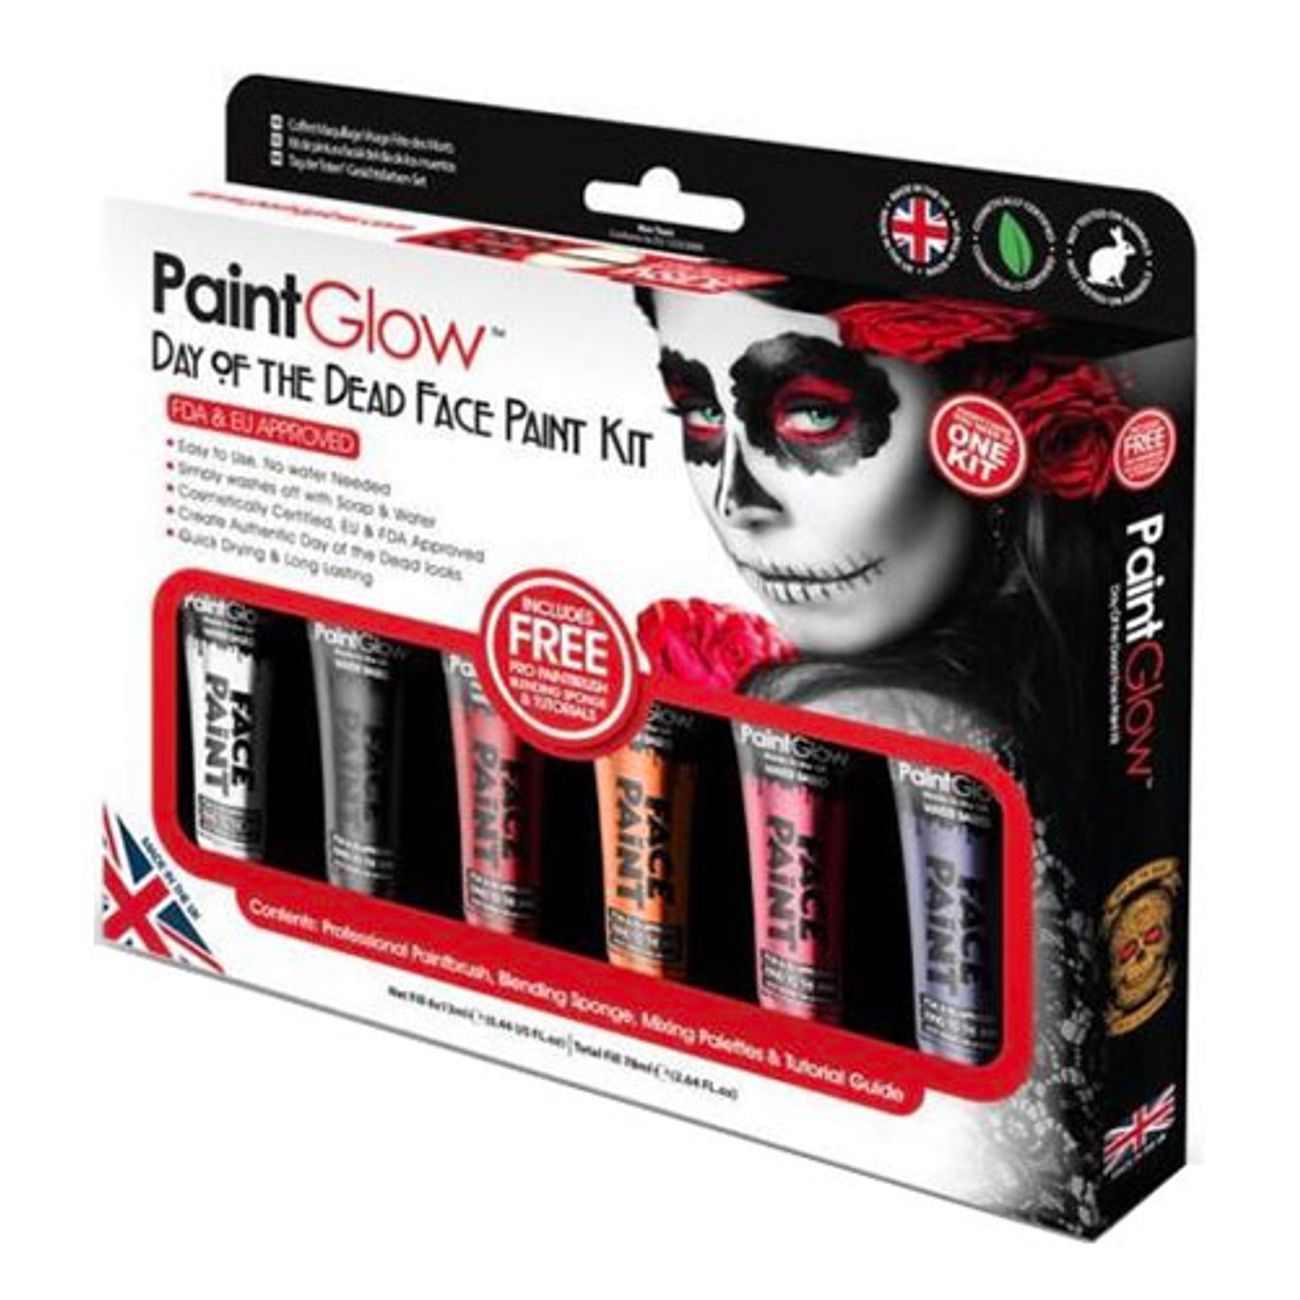 paintglow-day-of-the-dead-kit-1